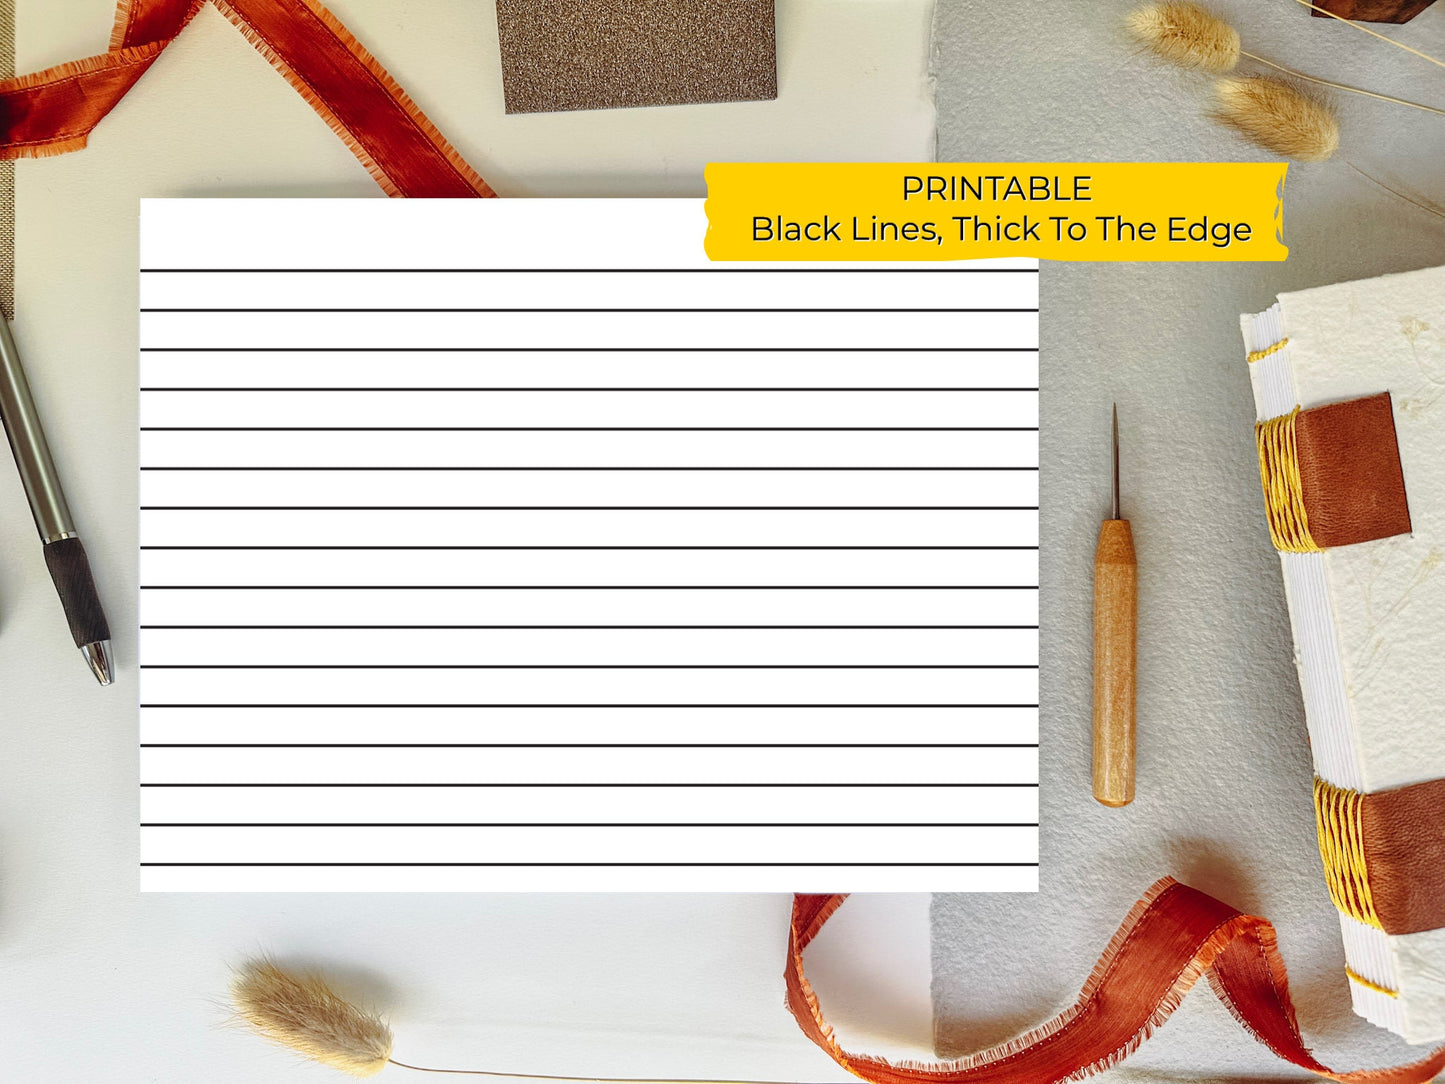 8.5 x 11 Thick To Edge LINED/RULED PRINTABLE Digital Book Binding Signature File - Black Lines